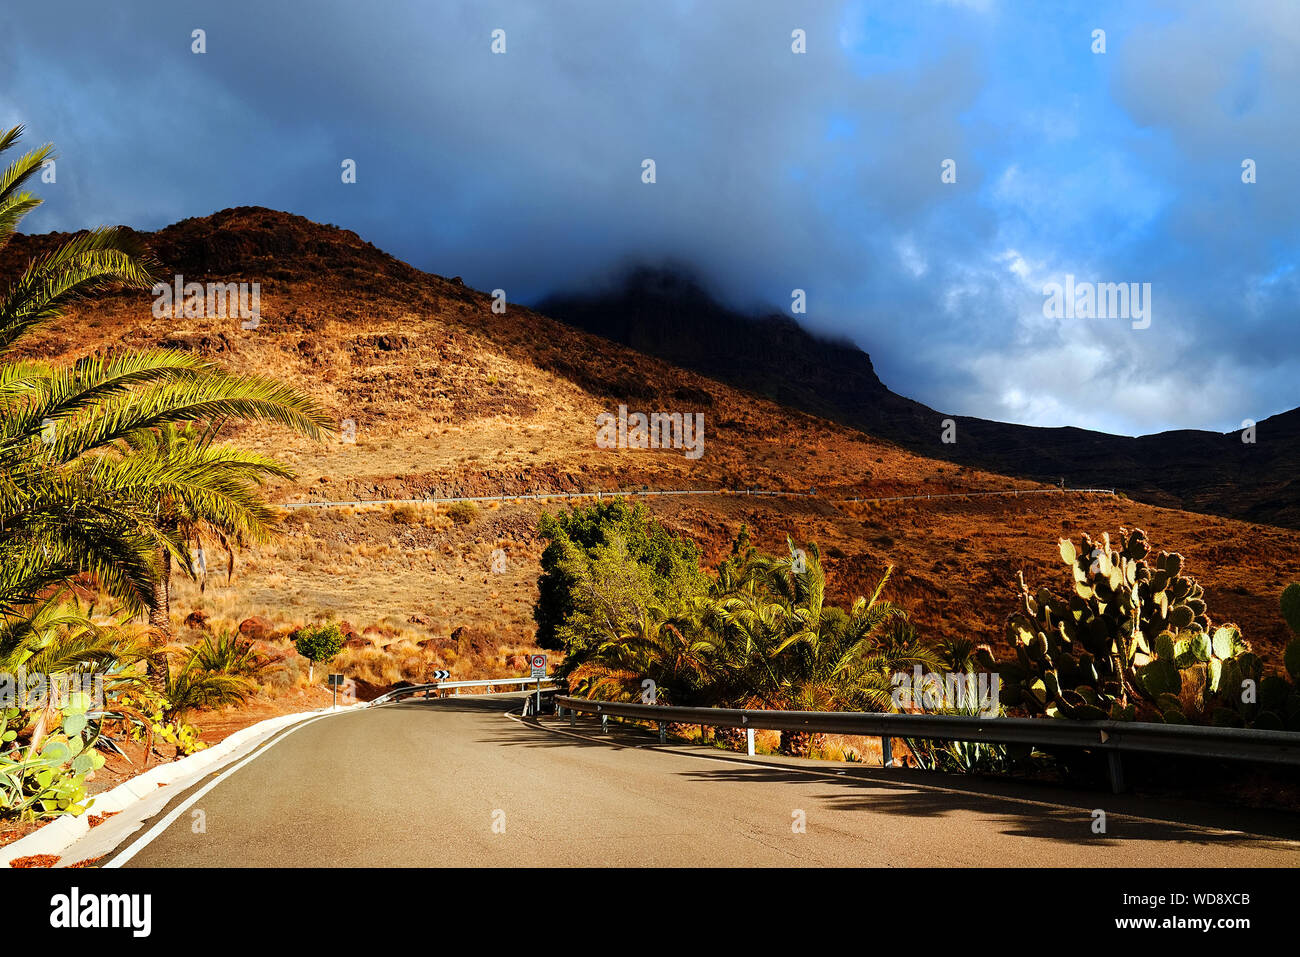 Diminishing Perspective Of Road Passing Through Mountains Against Cloudy Sky Stock Photo